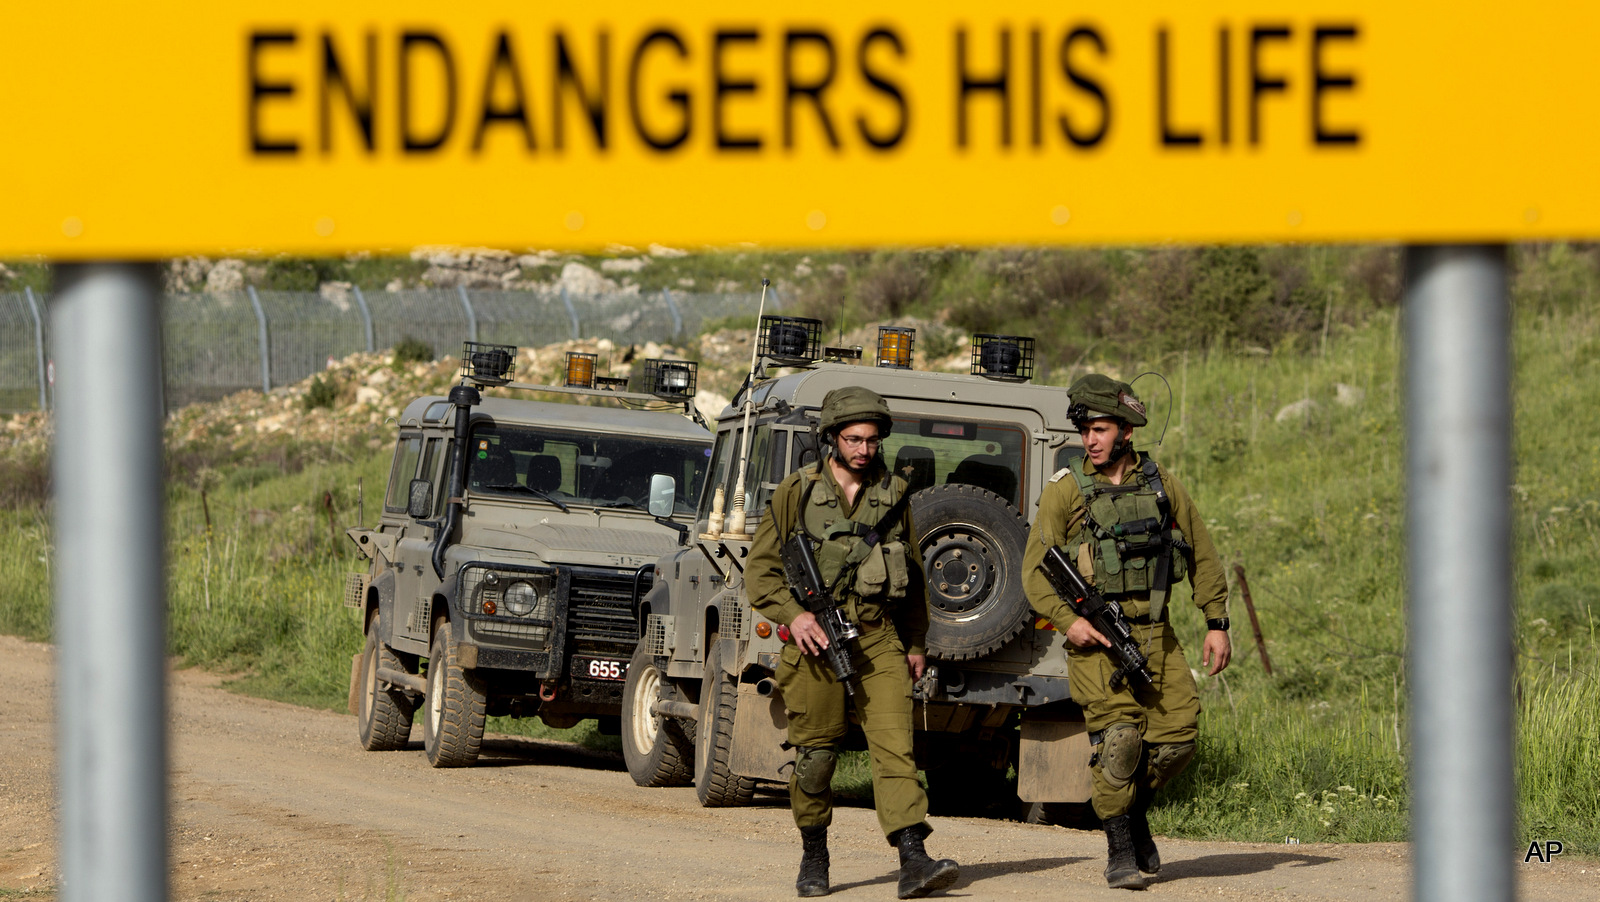 Israeli soldiers walks near the border with Syria near the site of a Sunday Israeli airstrike, in the Israeli controlled Golan Heights, Monday, April 27, 2015